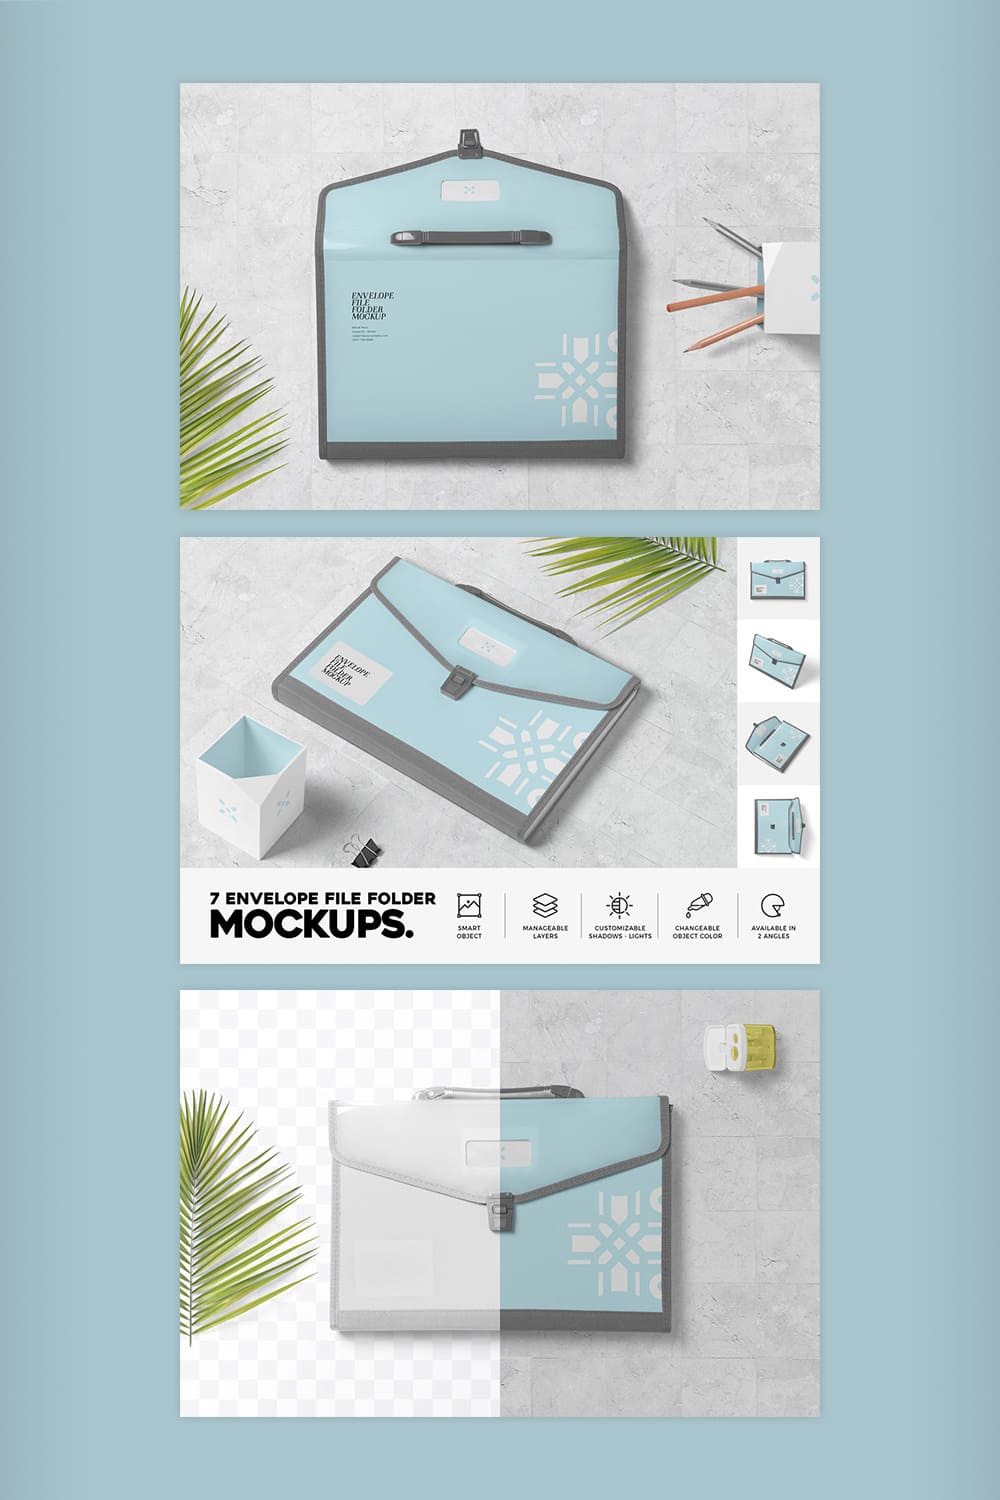 Collection of images of envelope file folders with exquisite design.